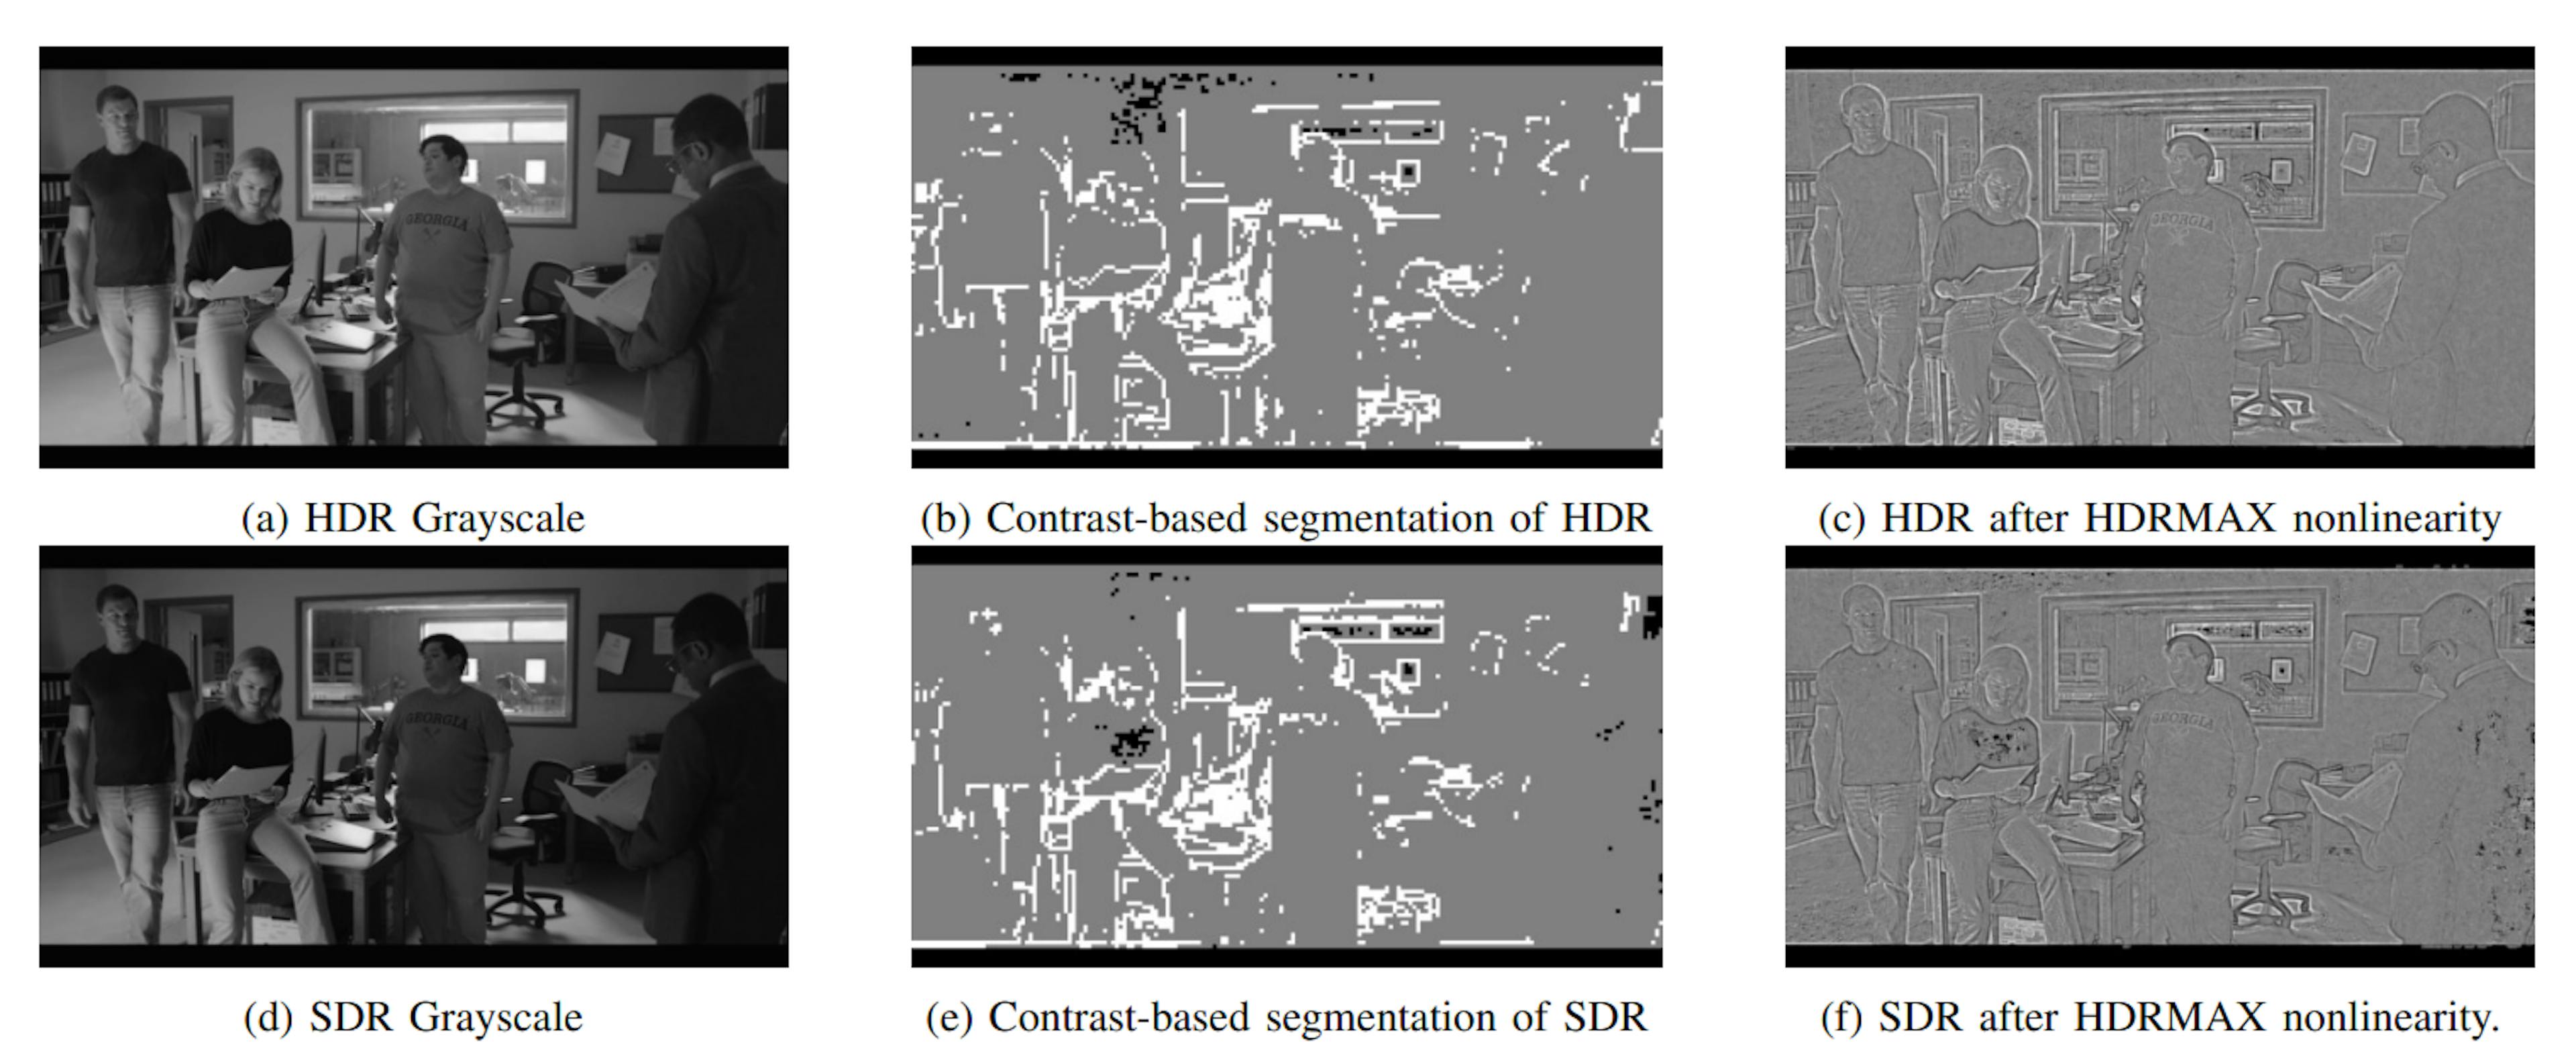 Fig. 8: Comparing HDR and SDR.